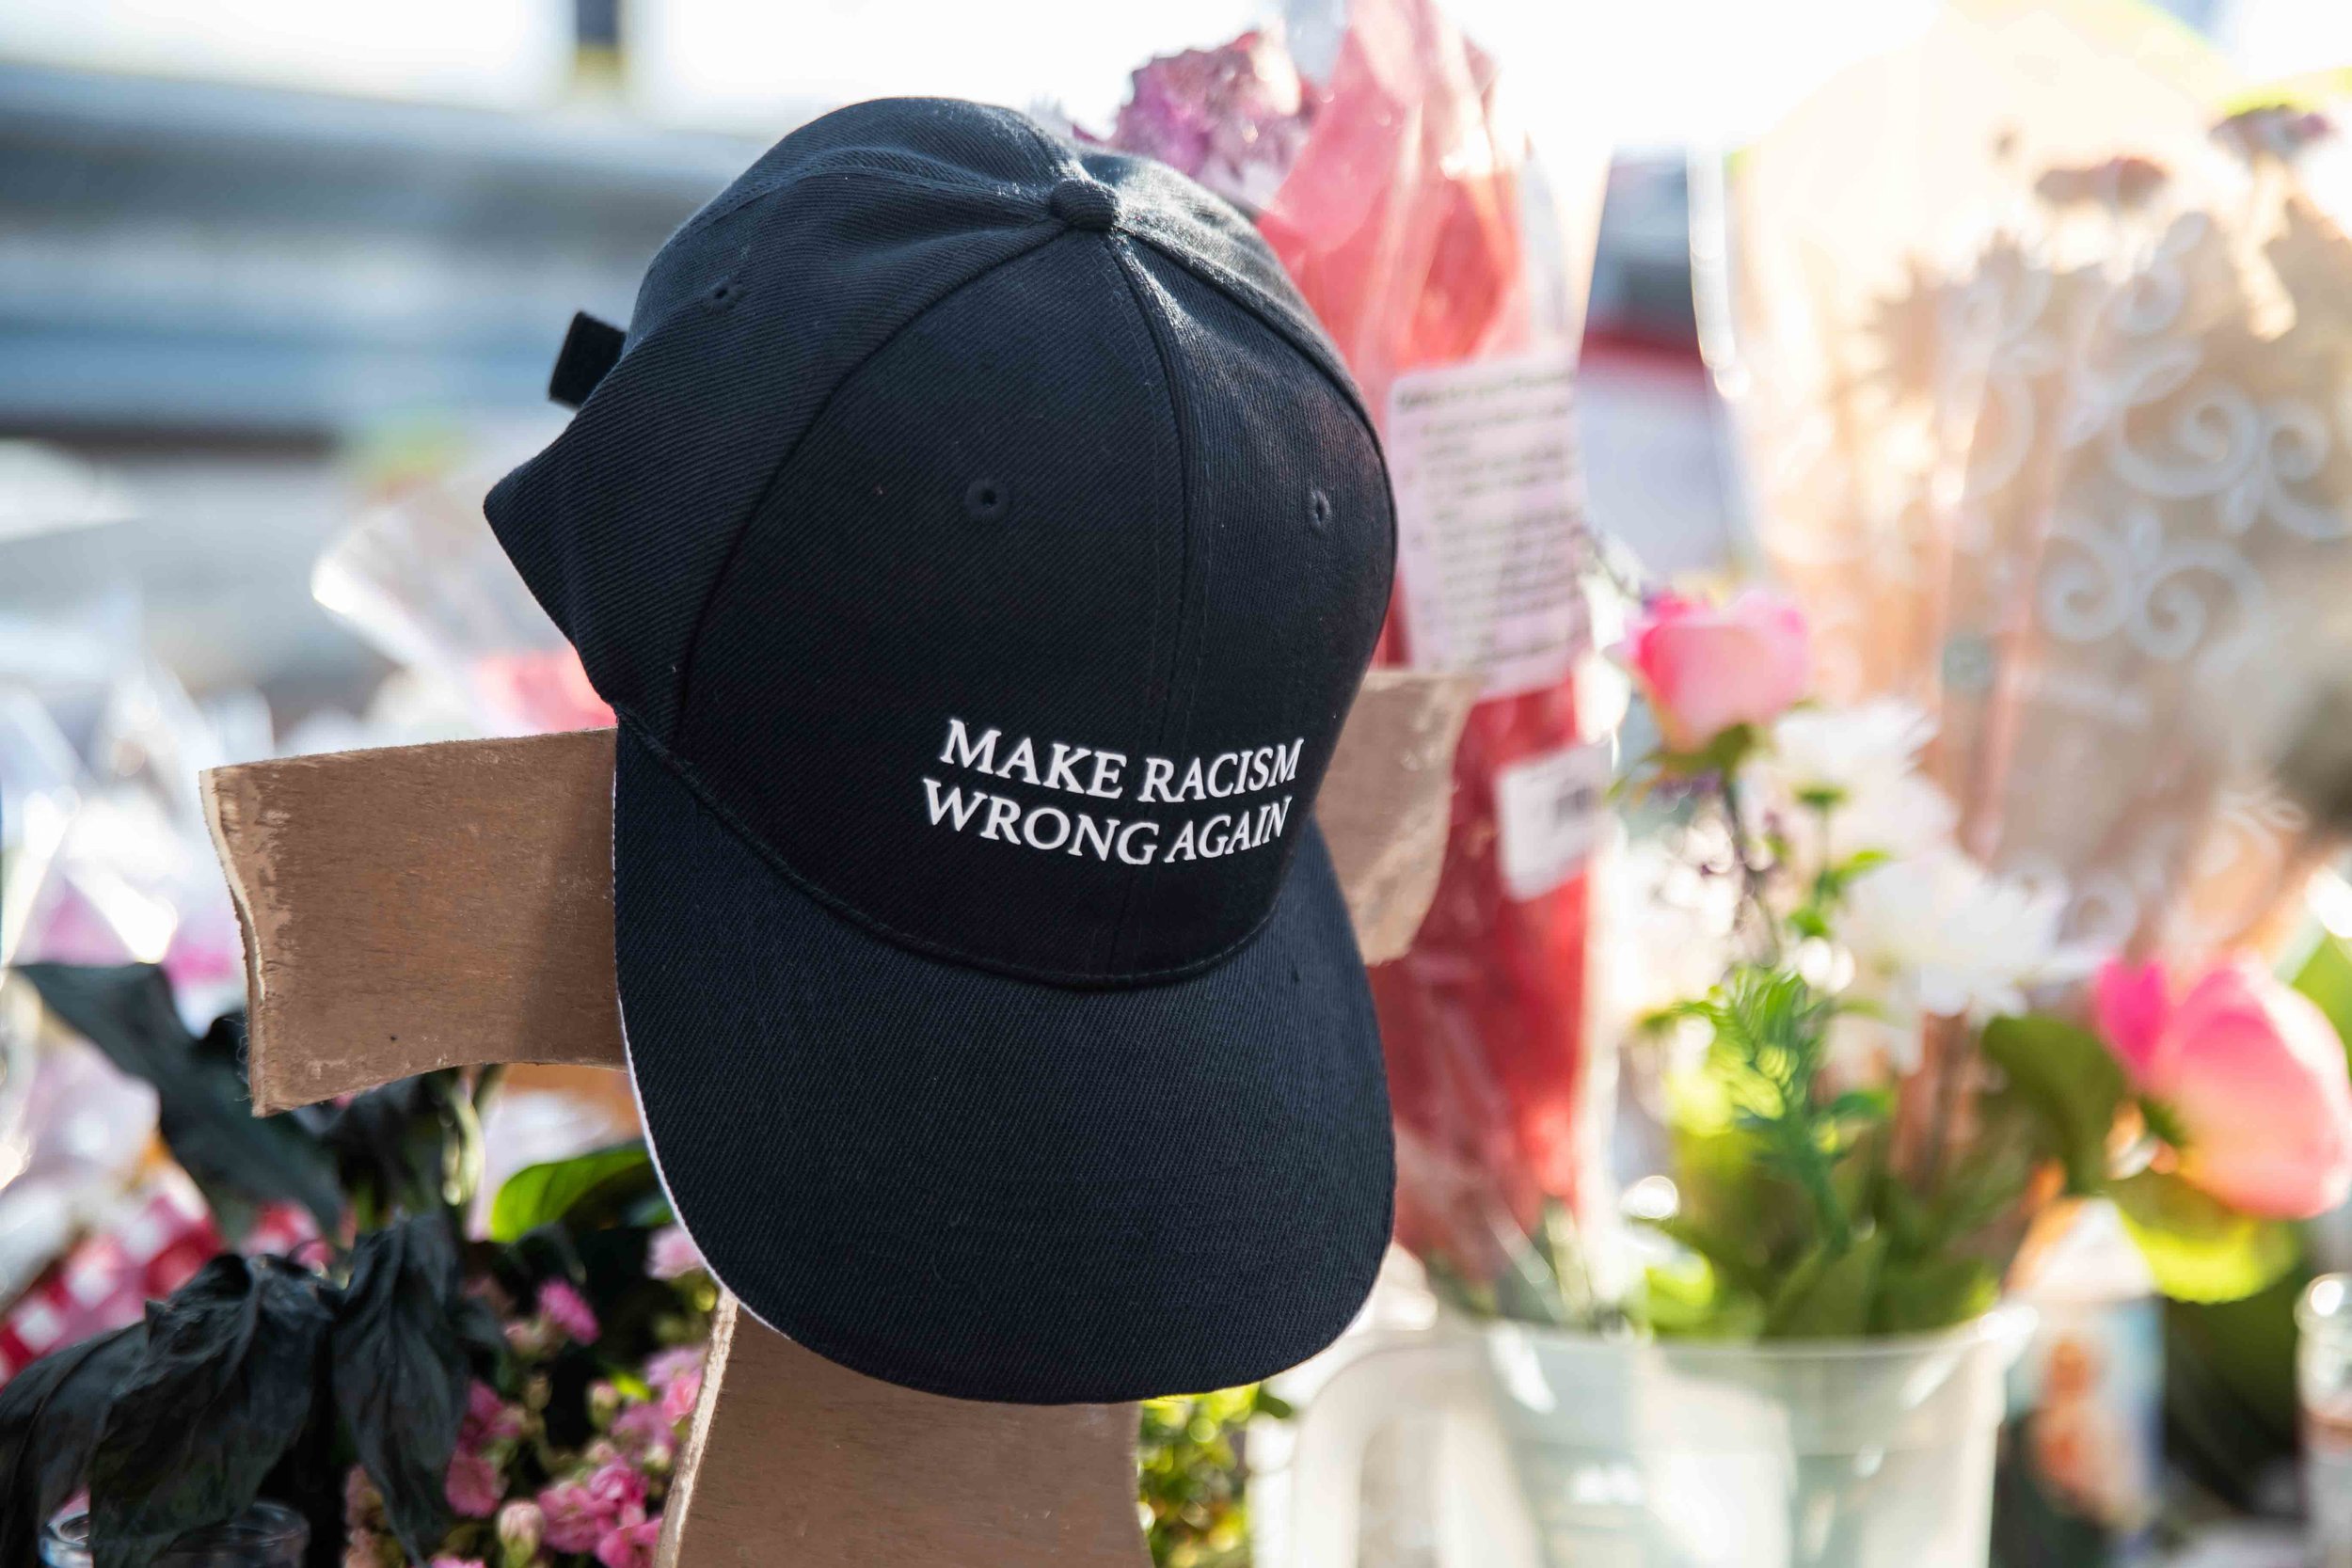  A cap with "MAKE RACISM WRONG AGAIN" is placed at the scene where a mass shooting occurred in Walmart last Saturday morning to honor victims' memory in El Paso on Monday, August 5, 2019. 